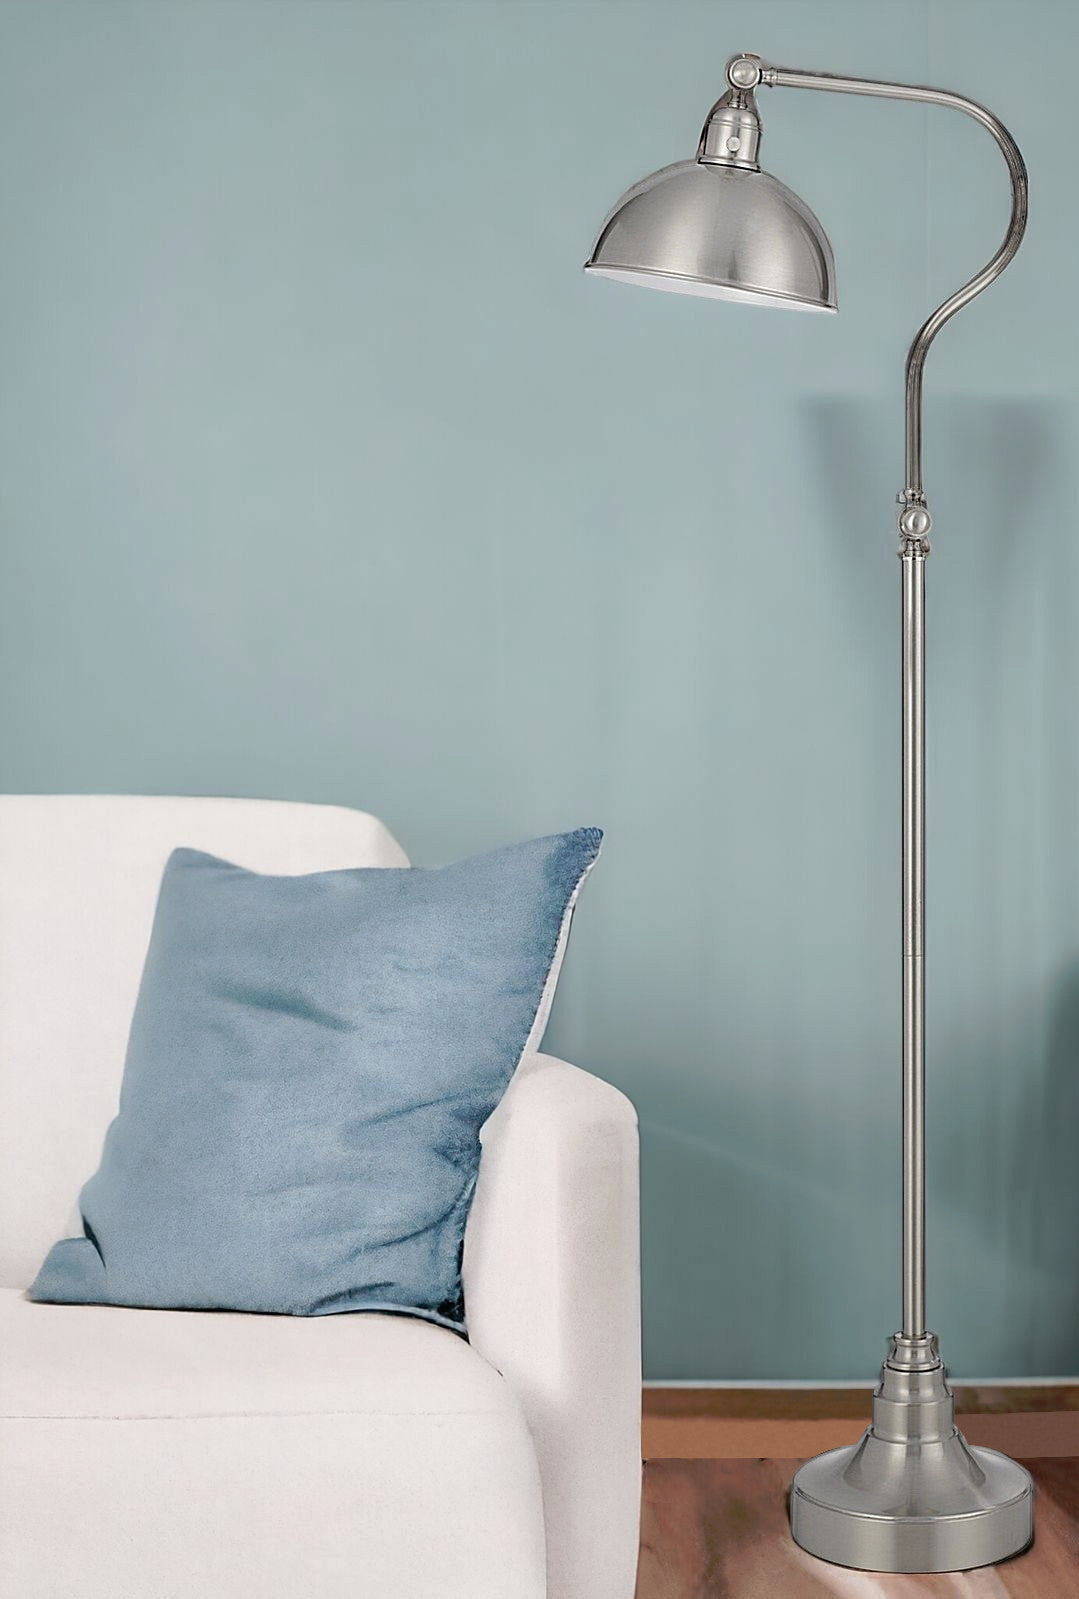 60" Nickel Traditional Shaped Floor Lamp With Nickel Dome Shade